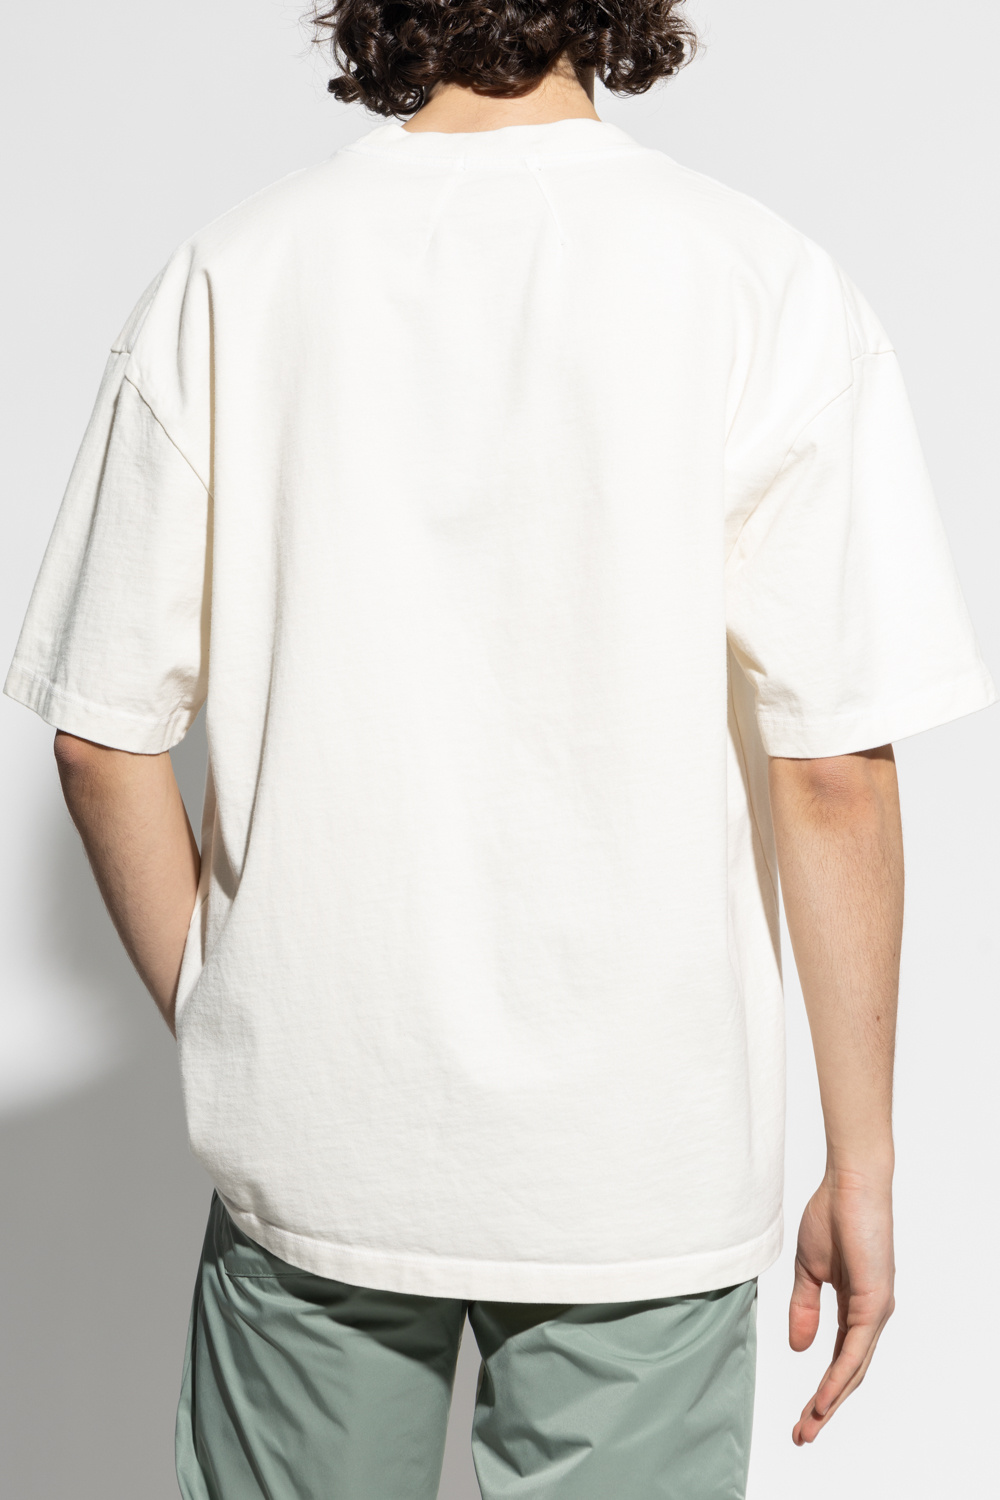 Rhude T-shirt HER with logo